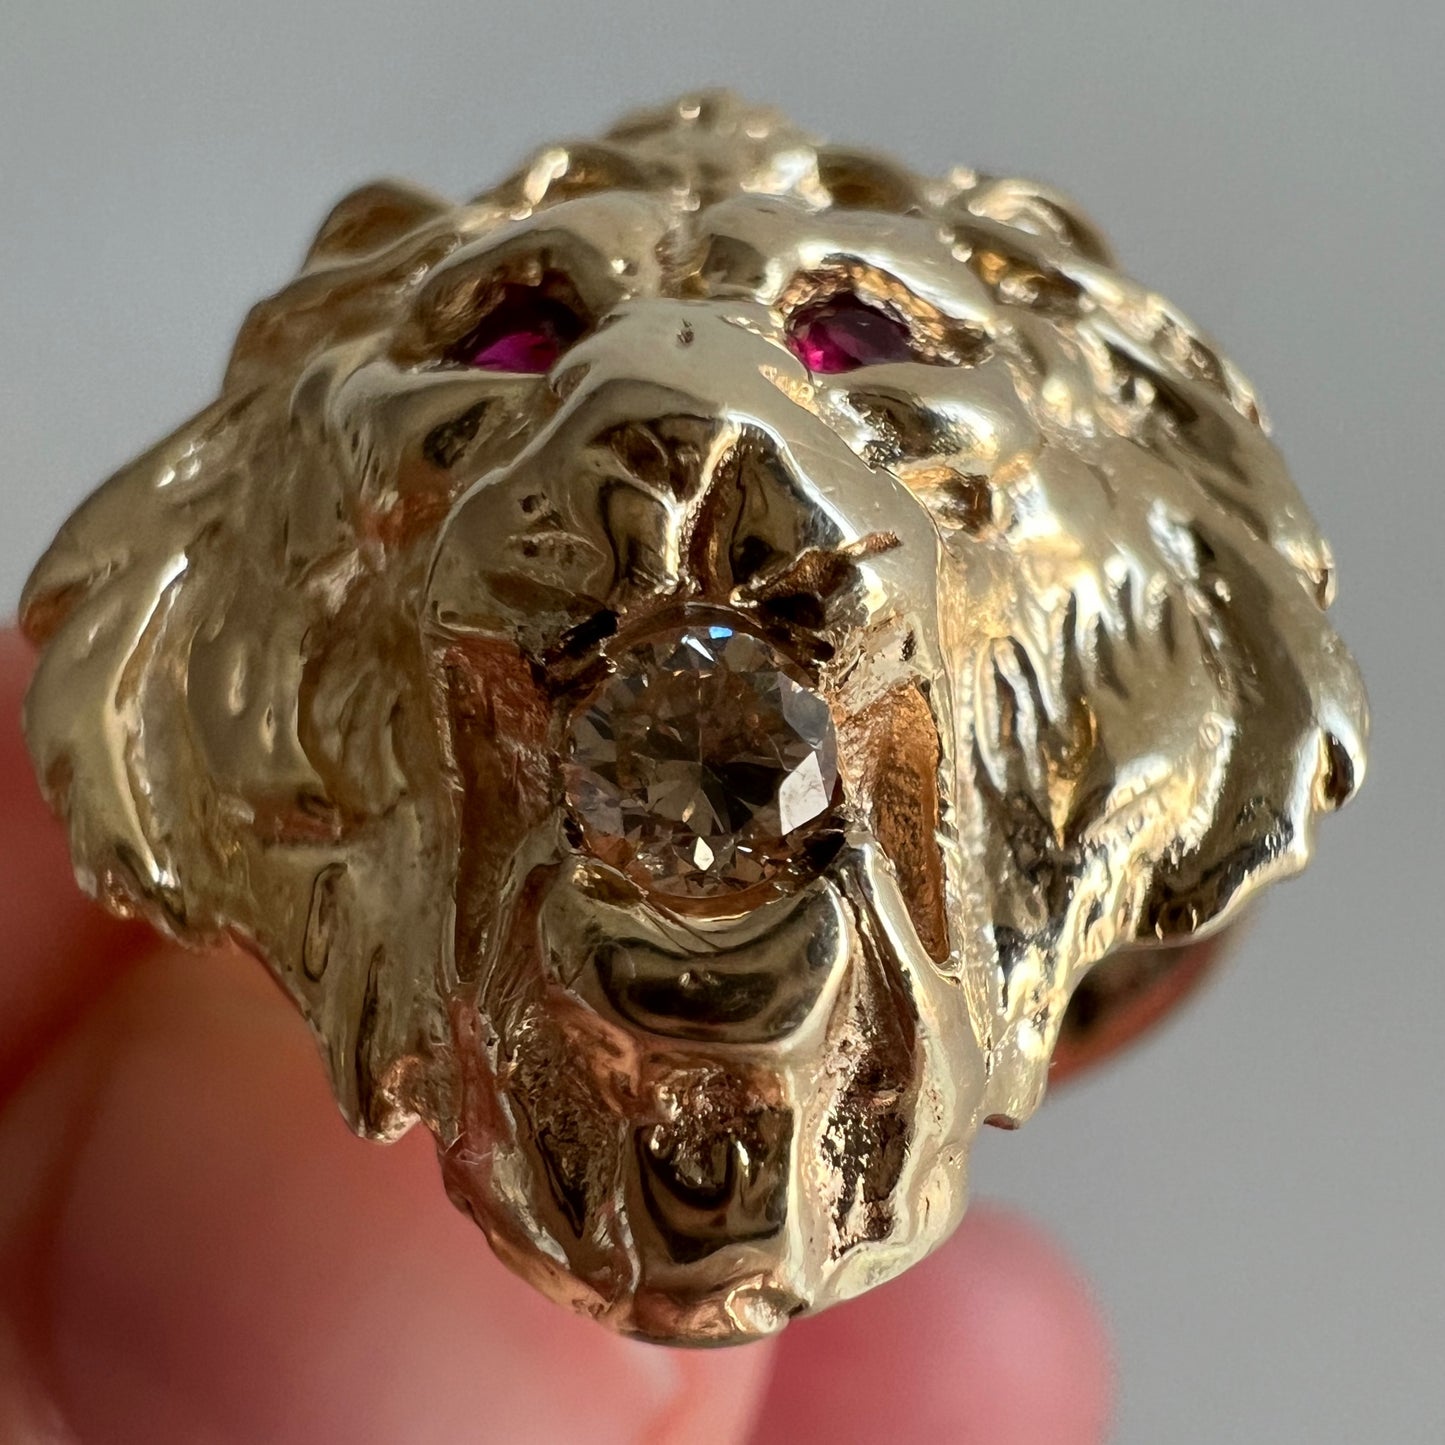 reimagined V I N T A G E // big cat strength / solid 14k yellow gold with diamond and rubies / size 7.5